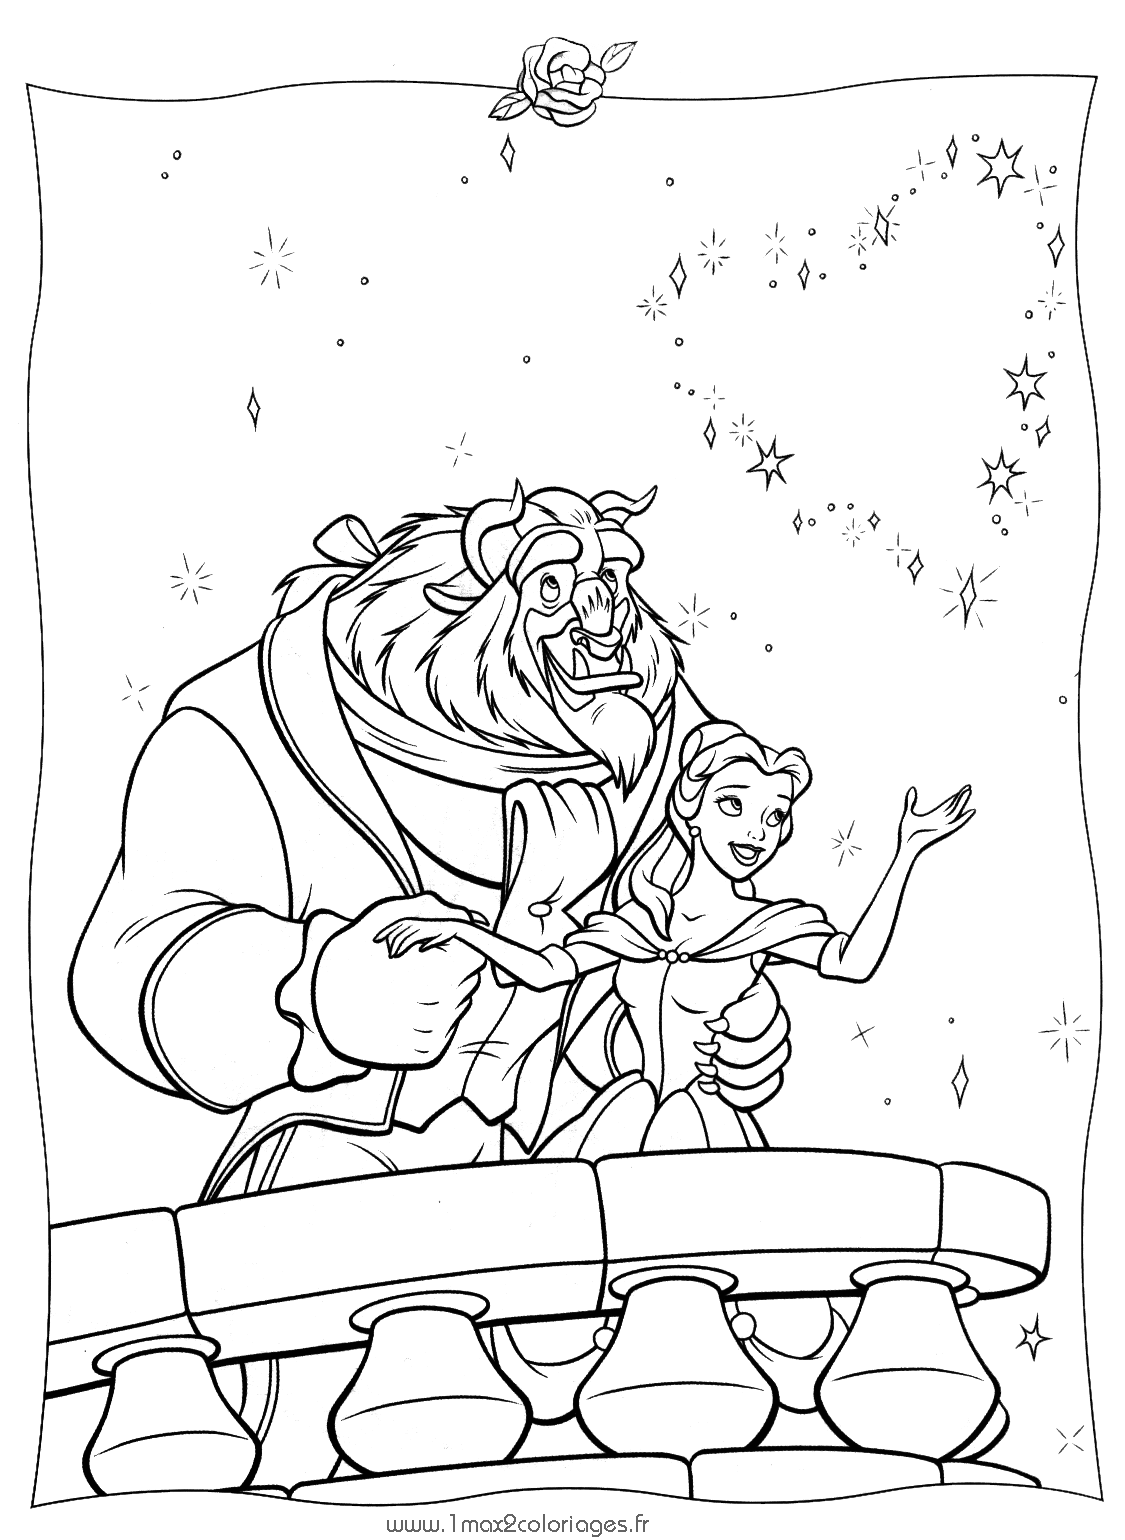 Coloring page: The Beauty and the Beast (Animation Movies) #131008 - Free Printable Coloring Pages